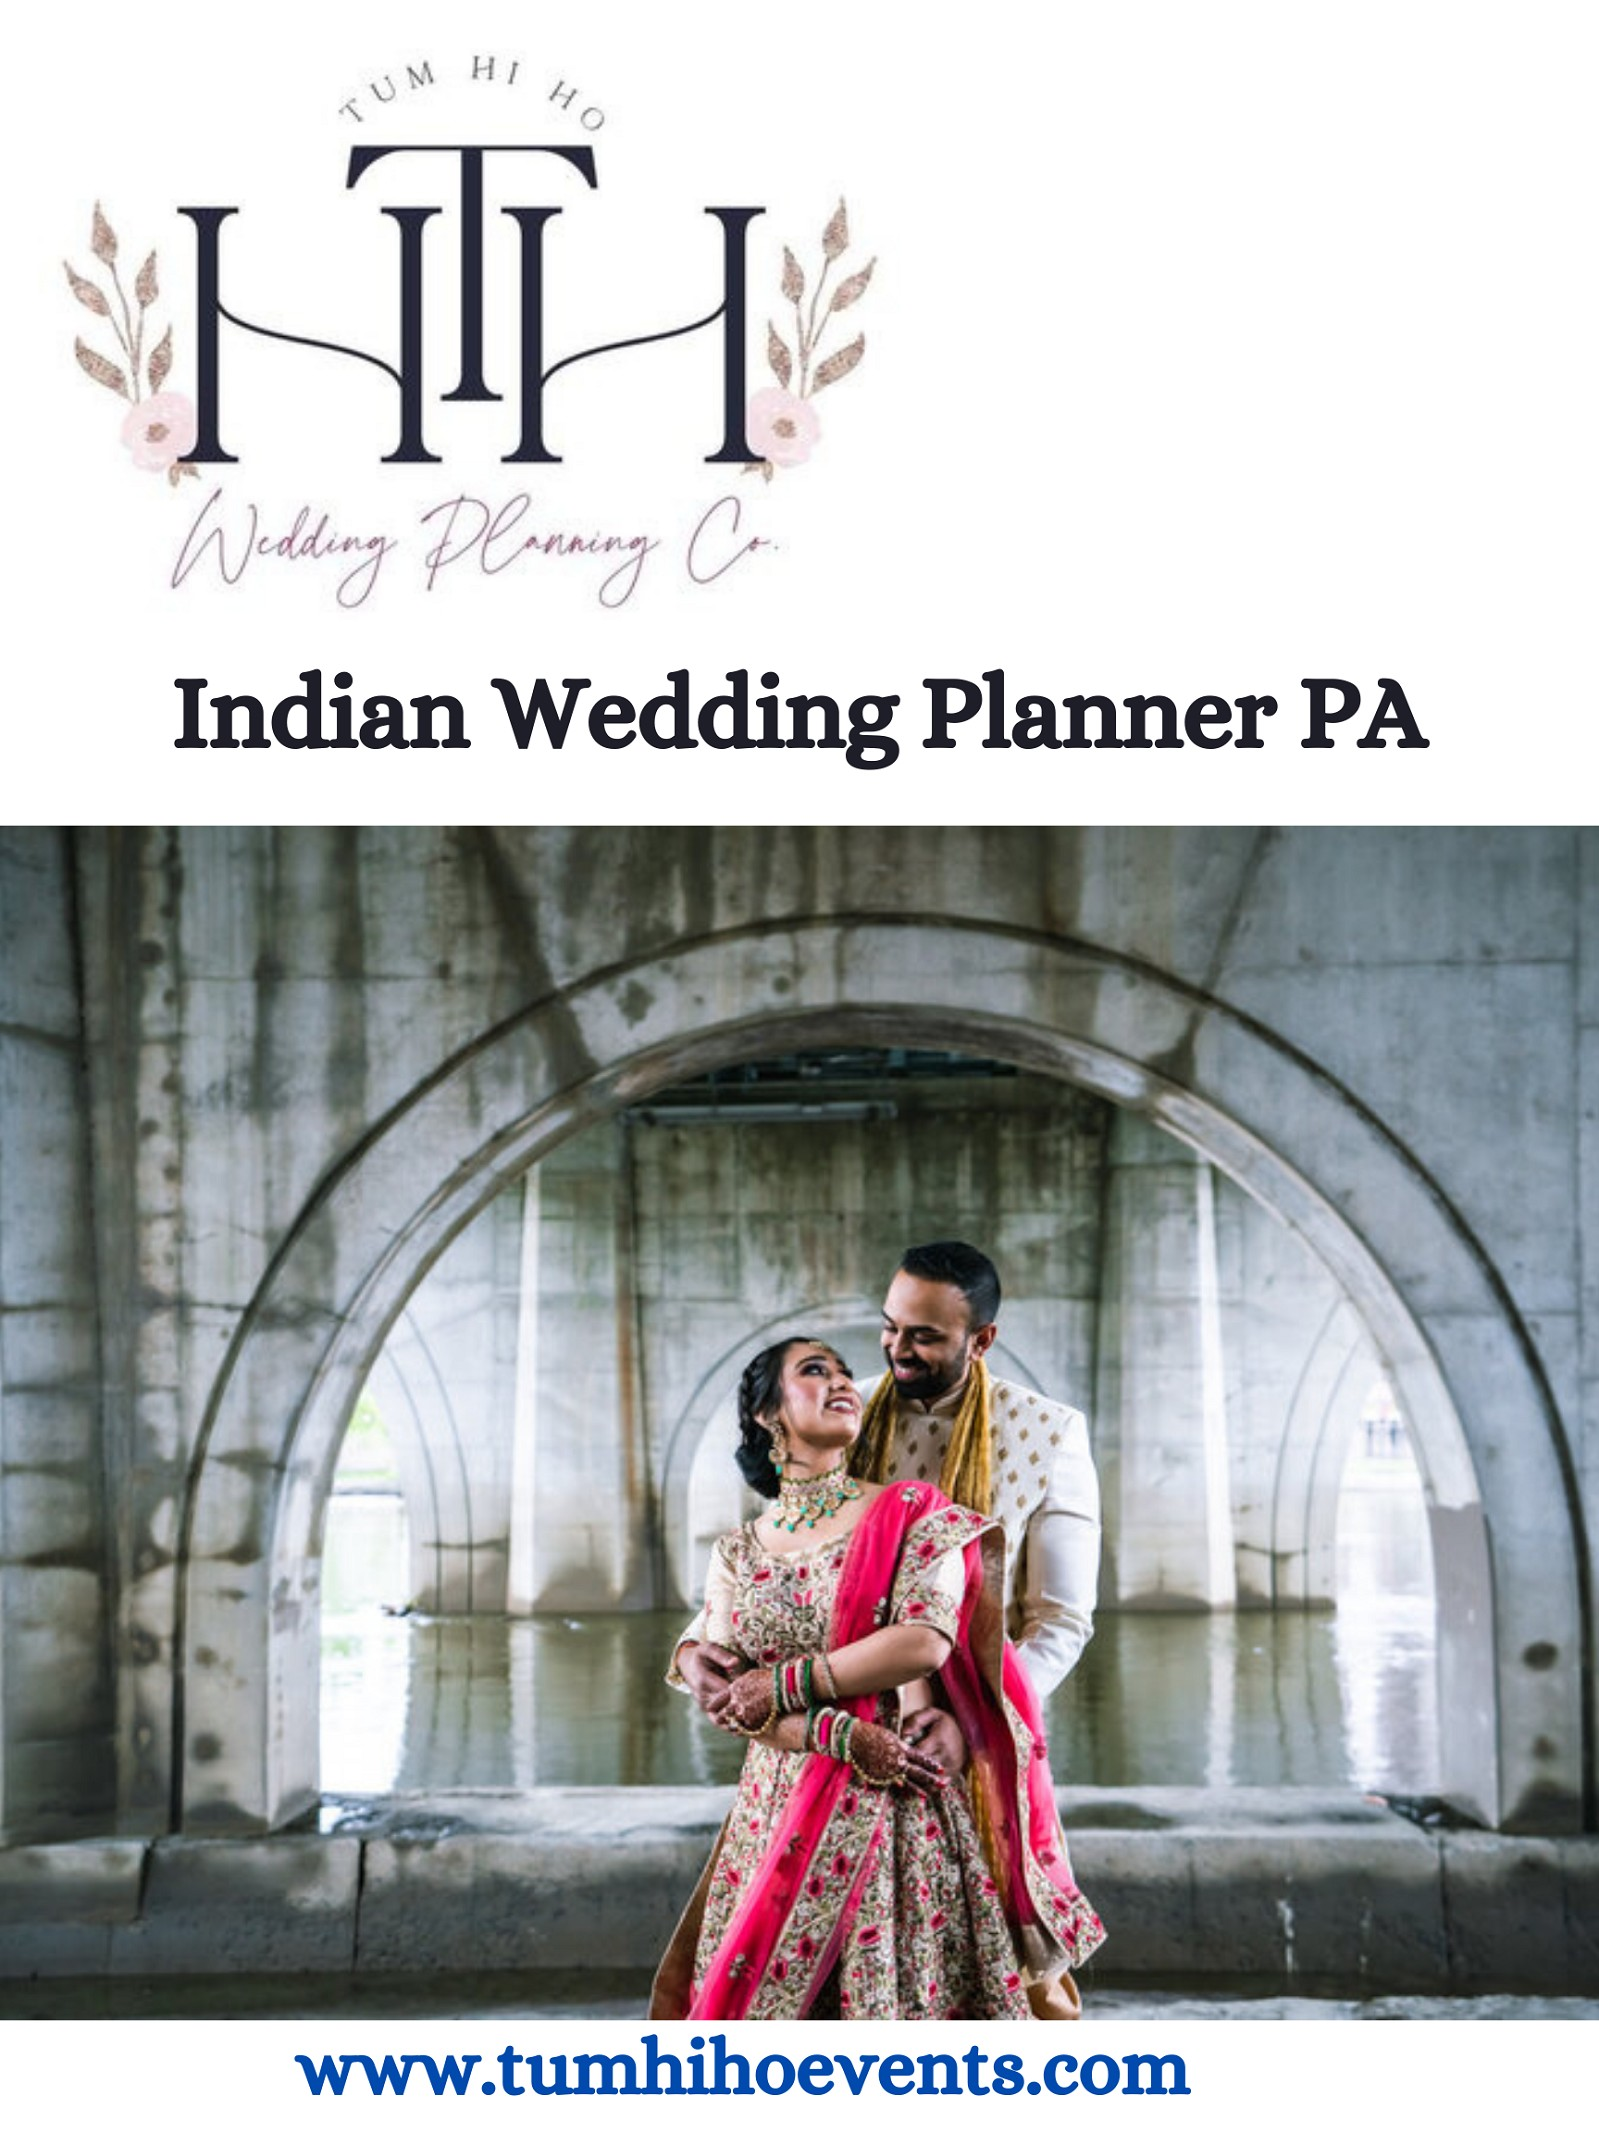 Hire Indian Wedding Planner in PA